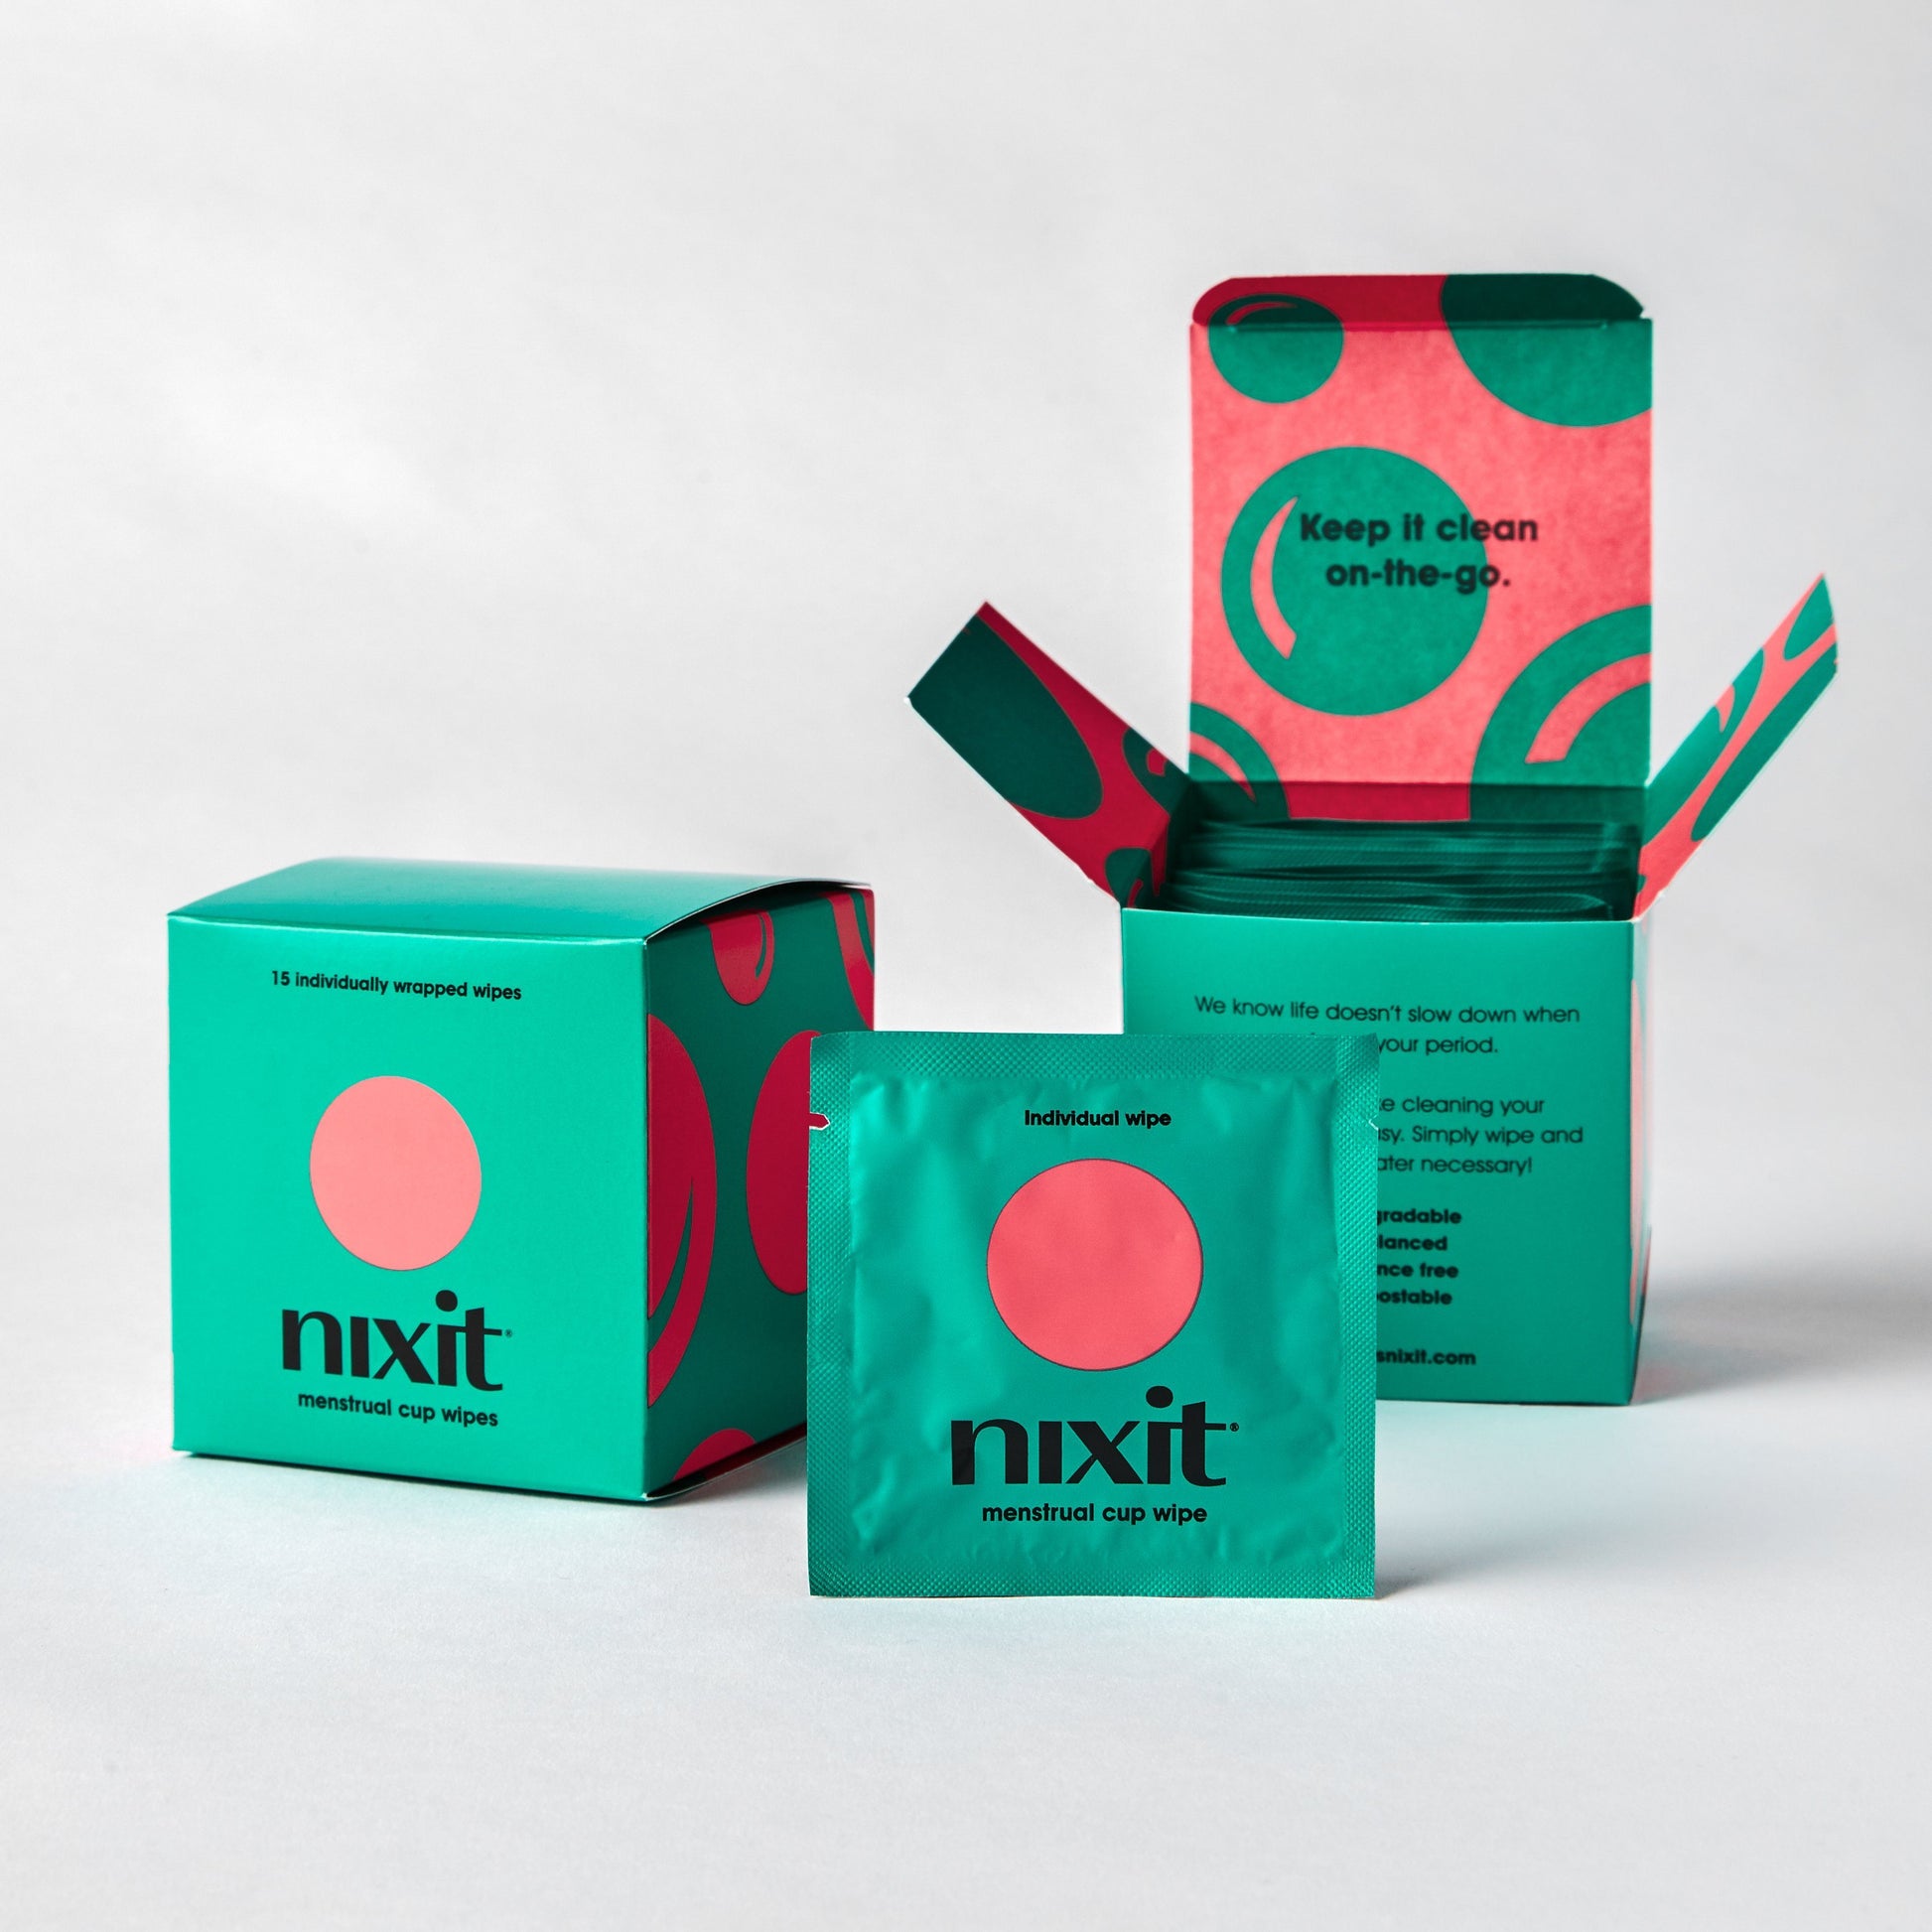 Photo of open nixit wipes box (15 per pack) - convenient menstrual cup wipes for keeping your period cup clean on-the-go